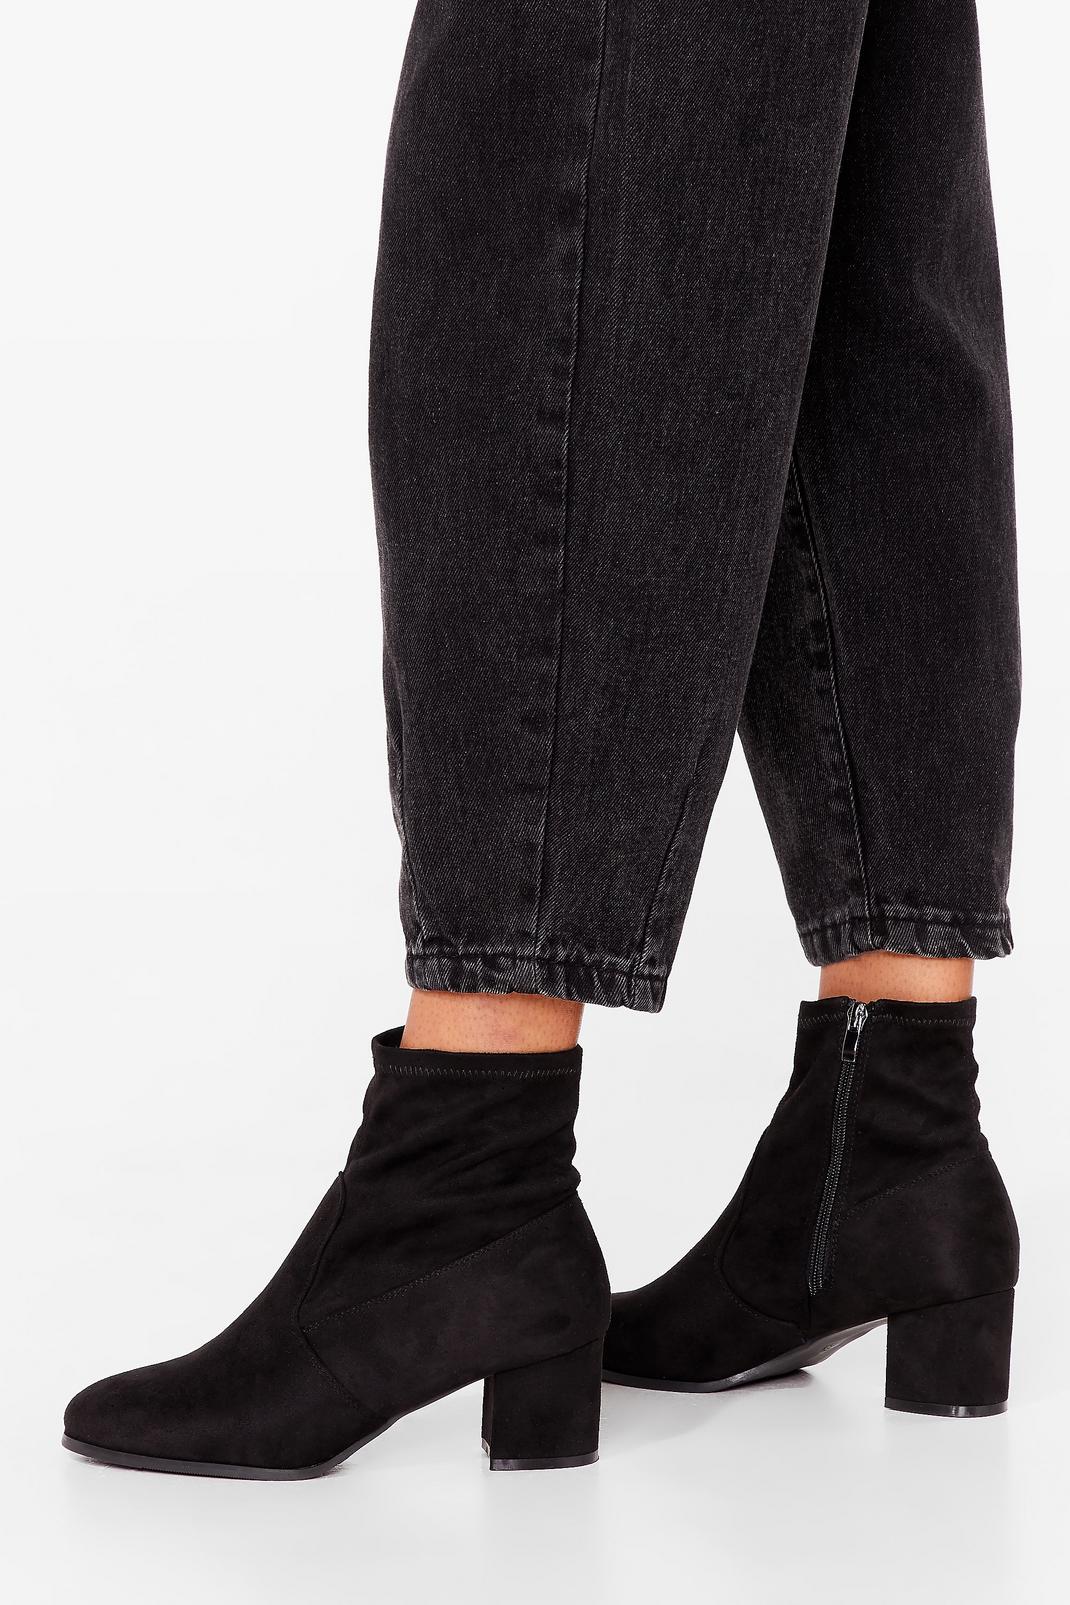 Black Faux Suede Wide Fit Heeled Boots image number 1